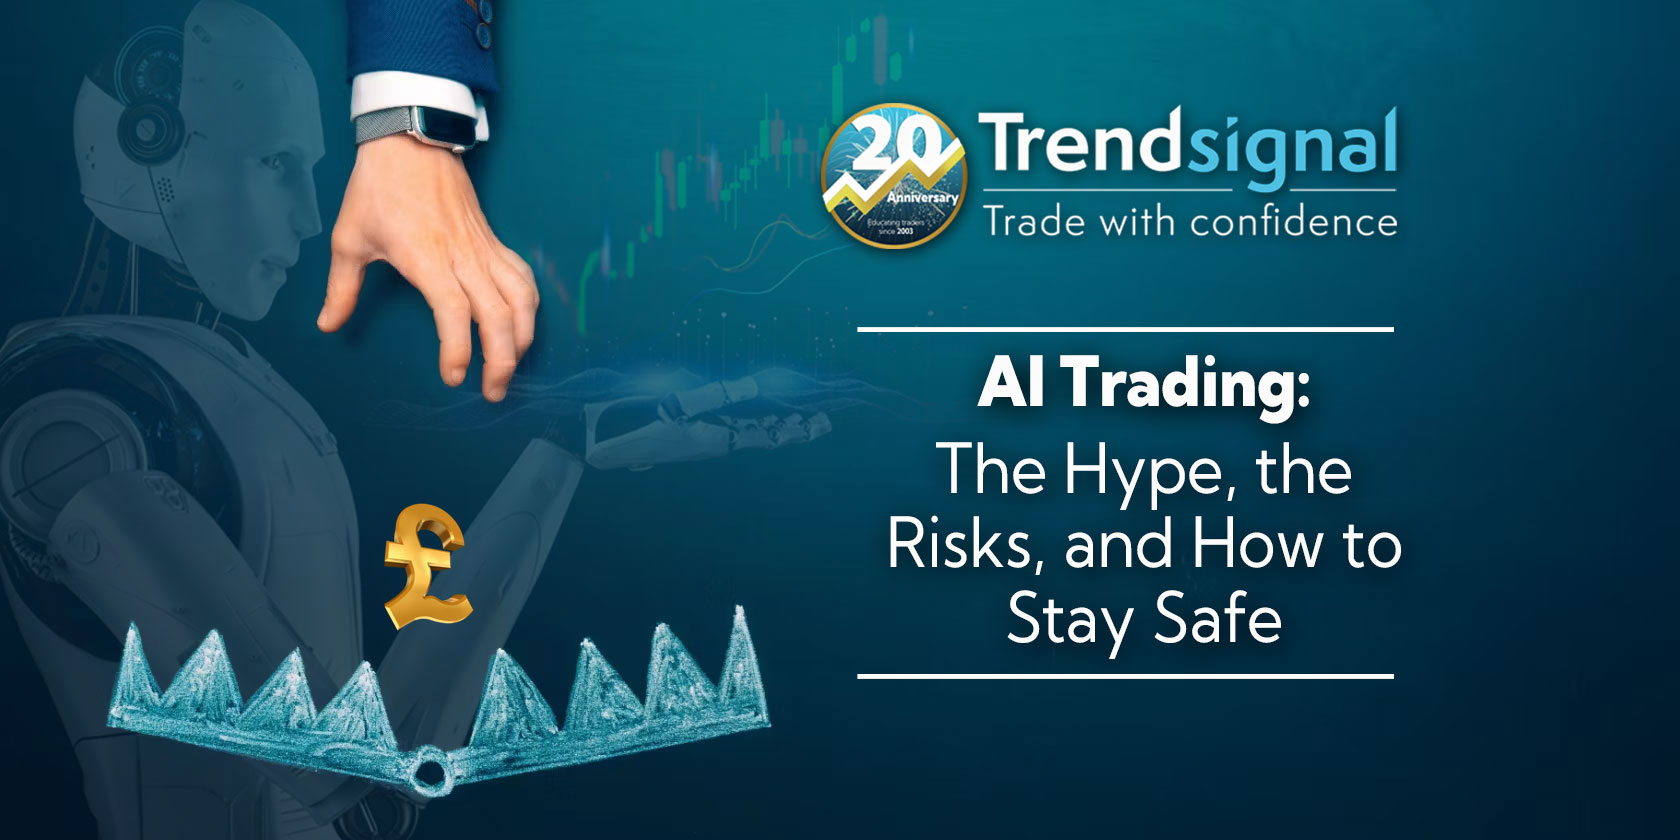 AI Trading: The Hype, the Risks, and How to Stay Safe